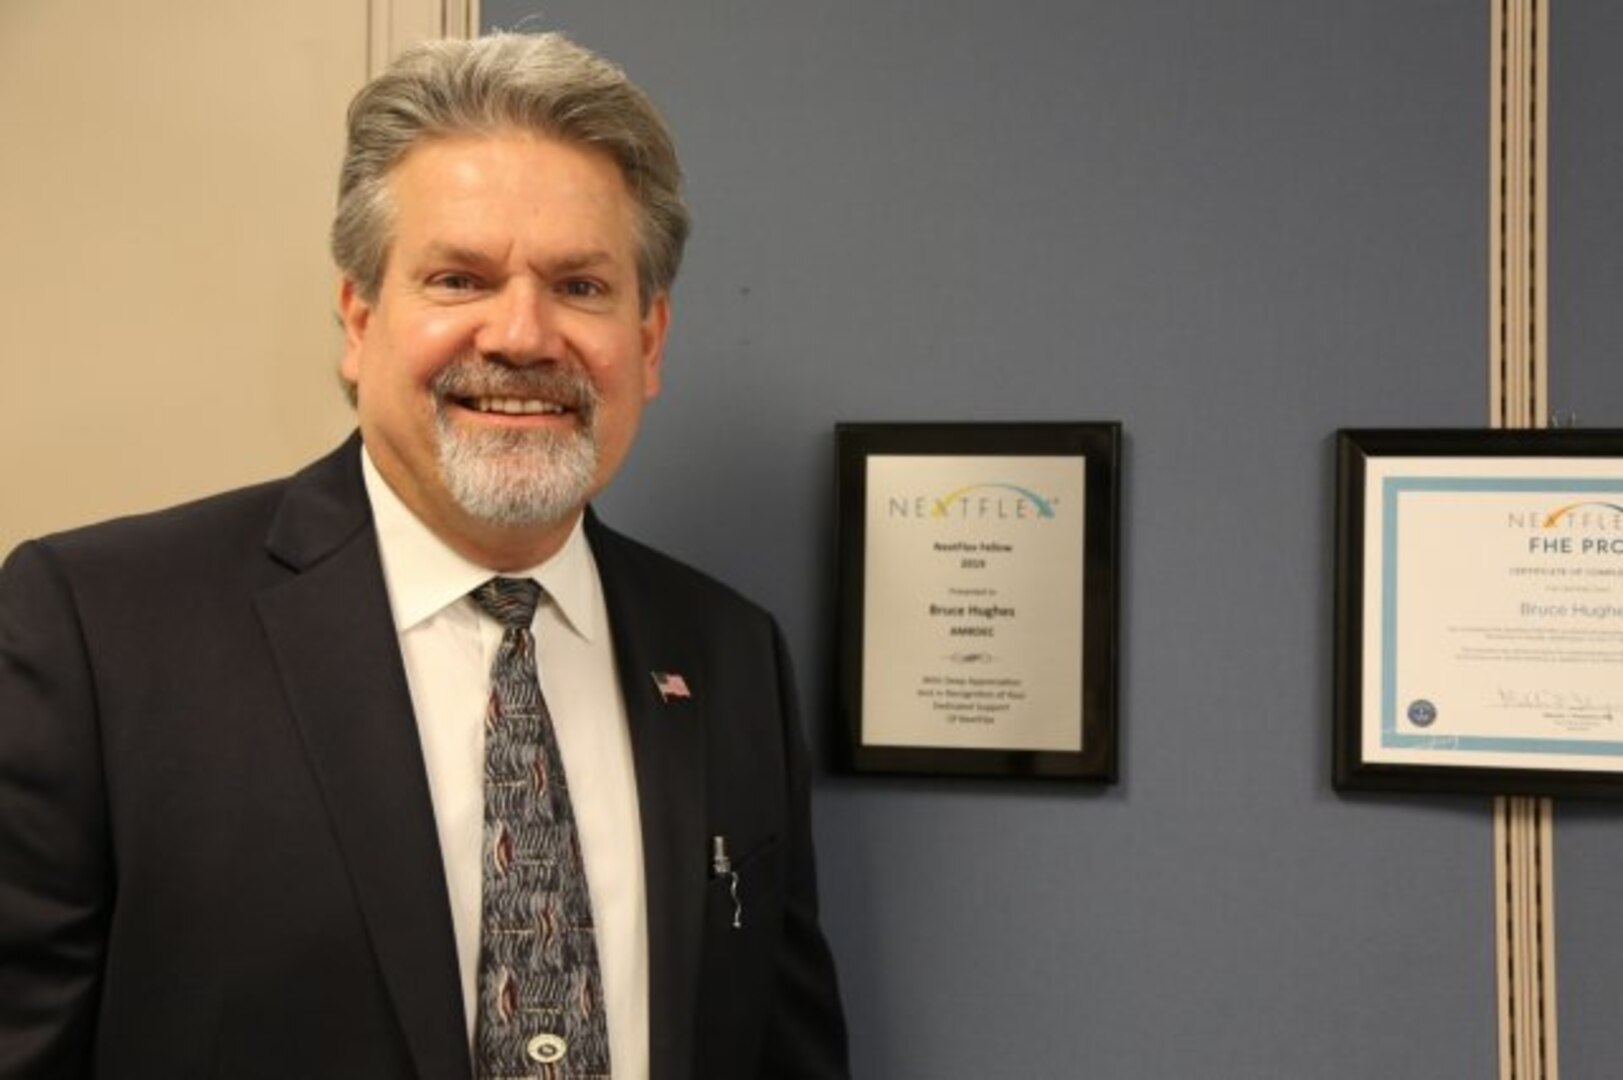 Bruce Hughes, U.S. Army Combat Capabilities Development Command Aviation & Missile Center Engineering Directorate electronics engineer and subject matter expert, poses next to a plaque commemorating his induction as a NextFlex fellow at Redstone Arsenal on May 2. (Photo Credit: Joanna Bradley)